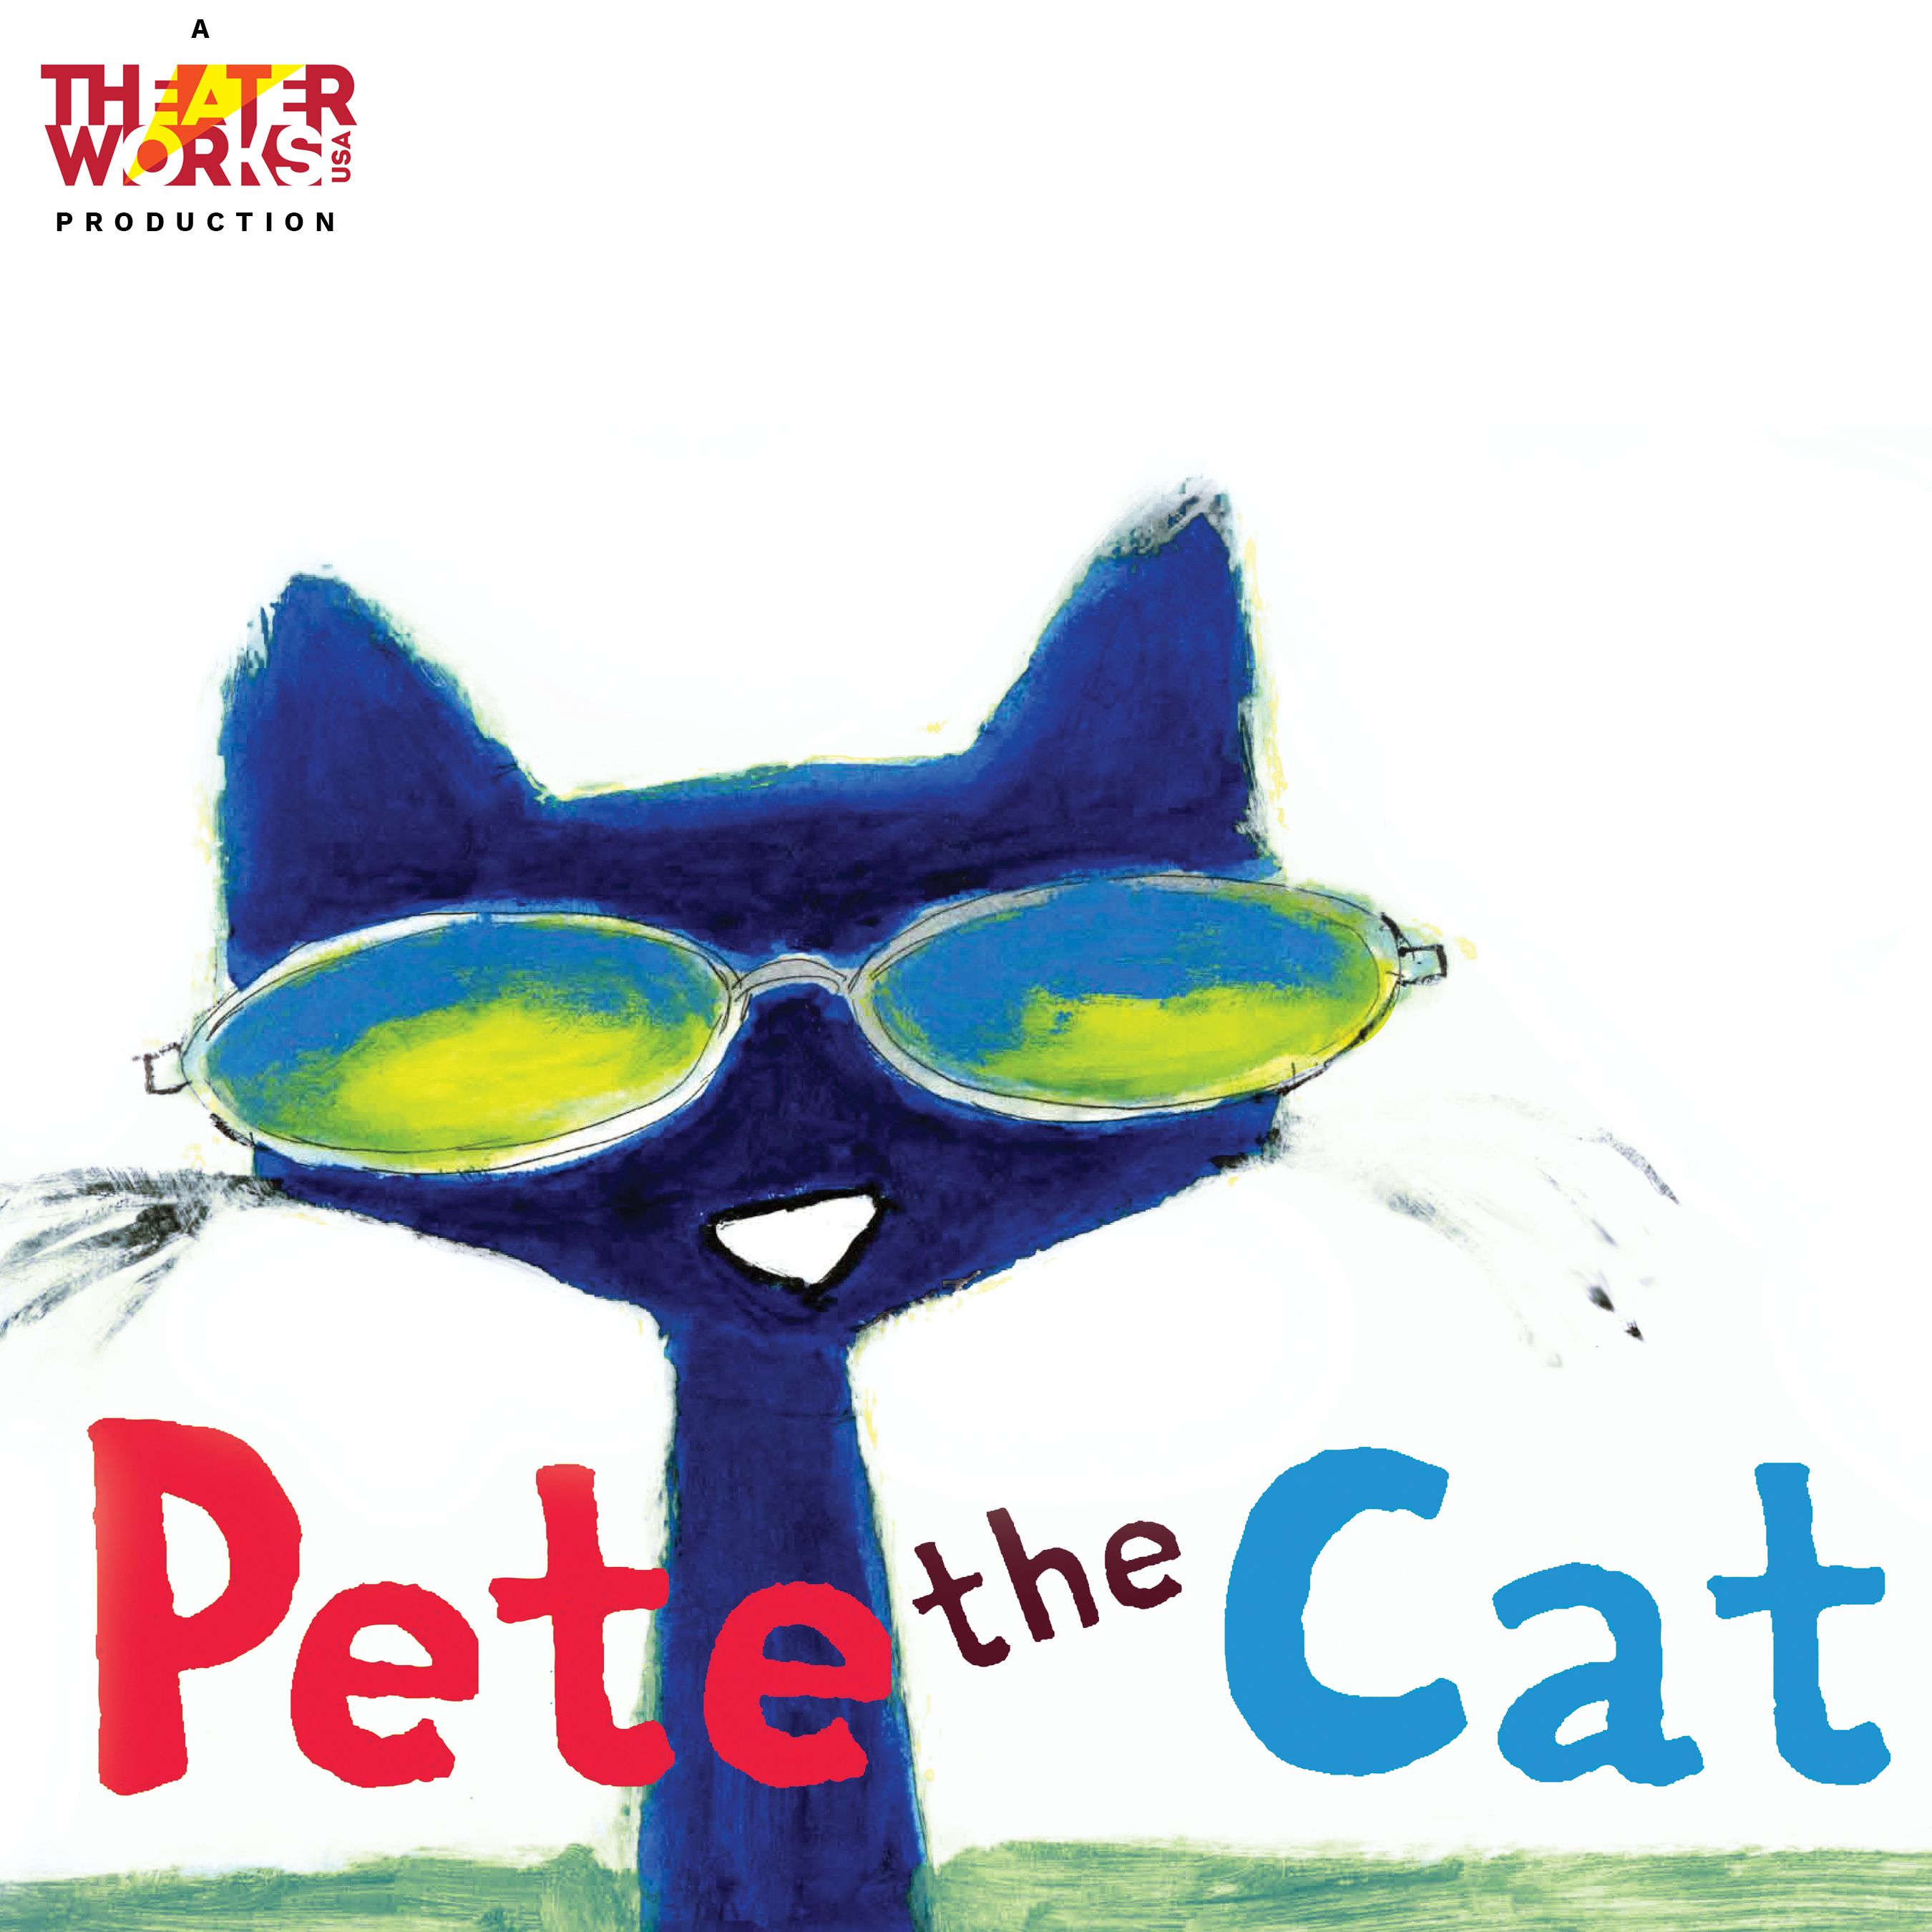 Pete the cat feb 12 and 13